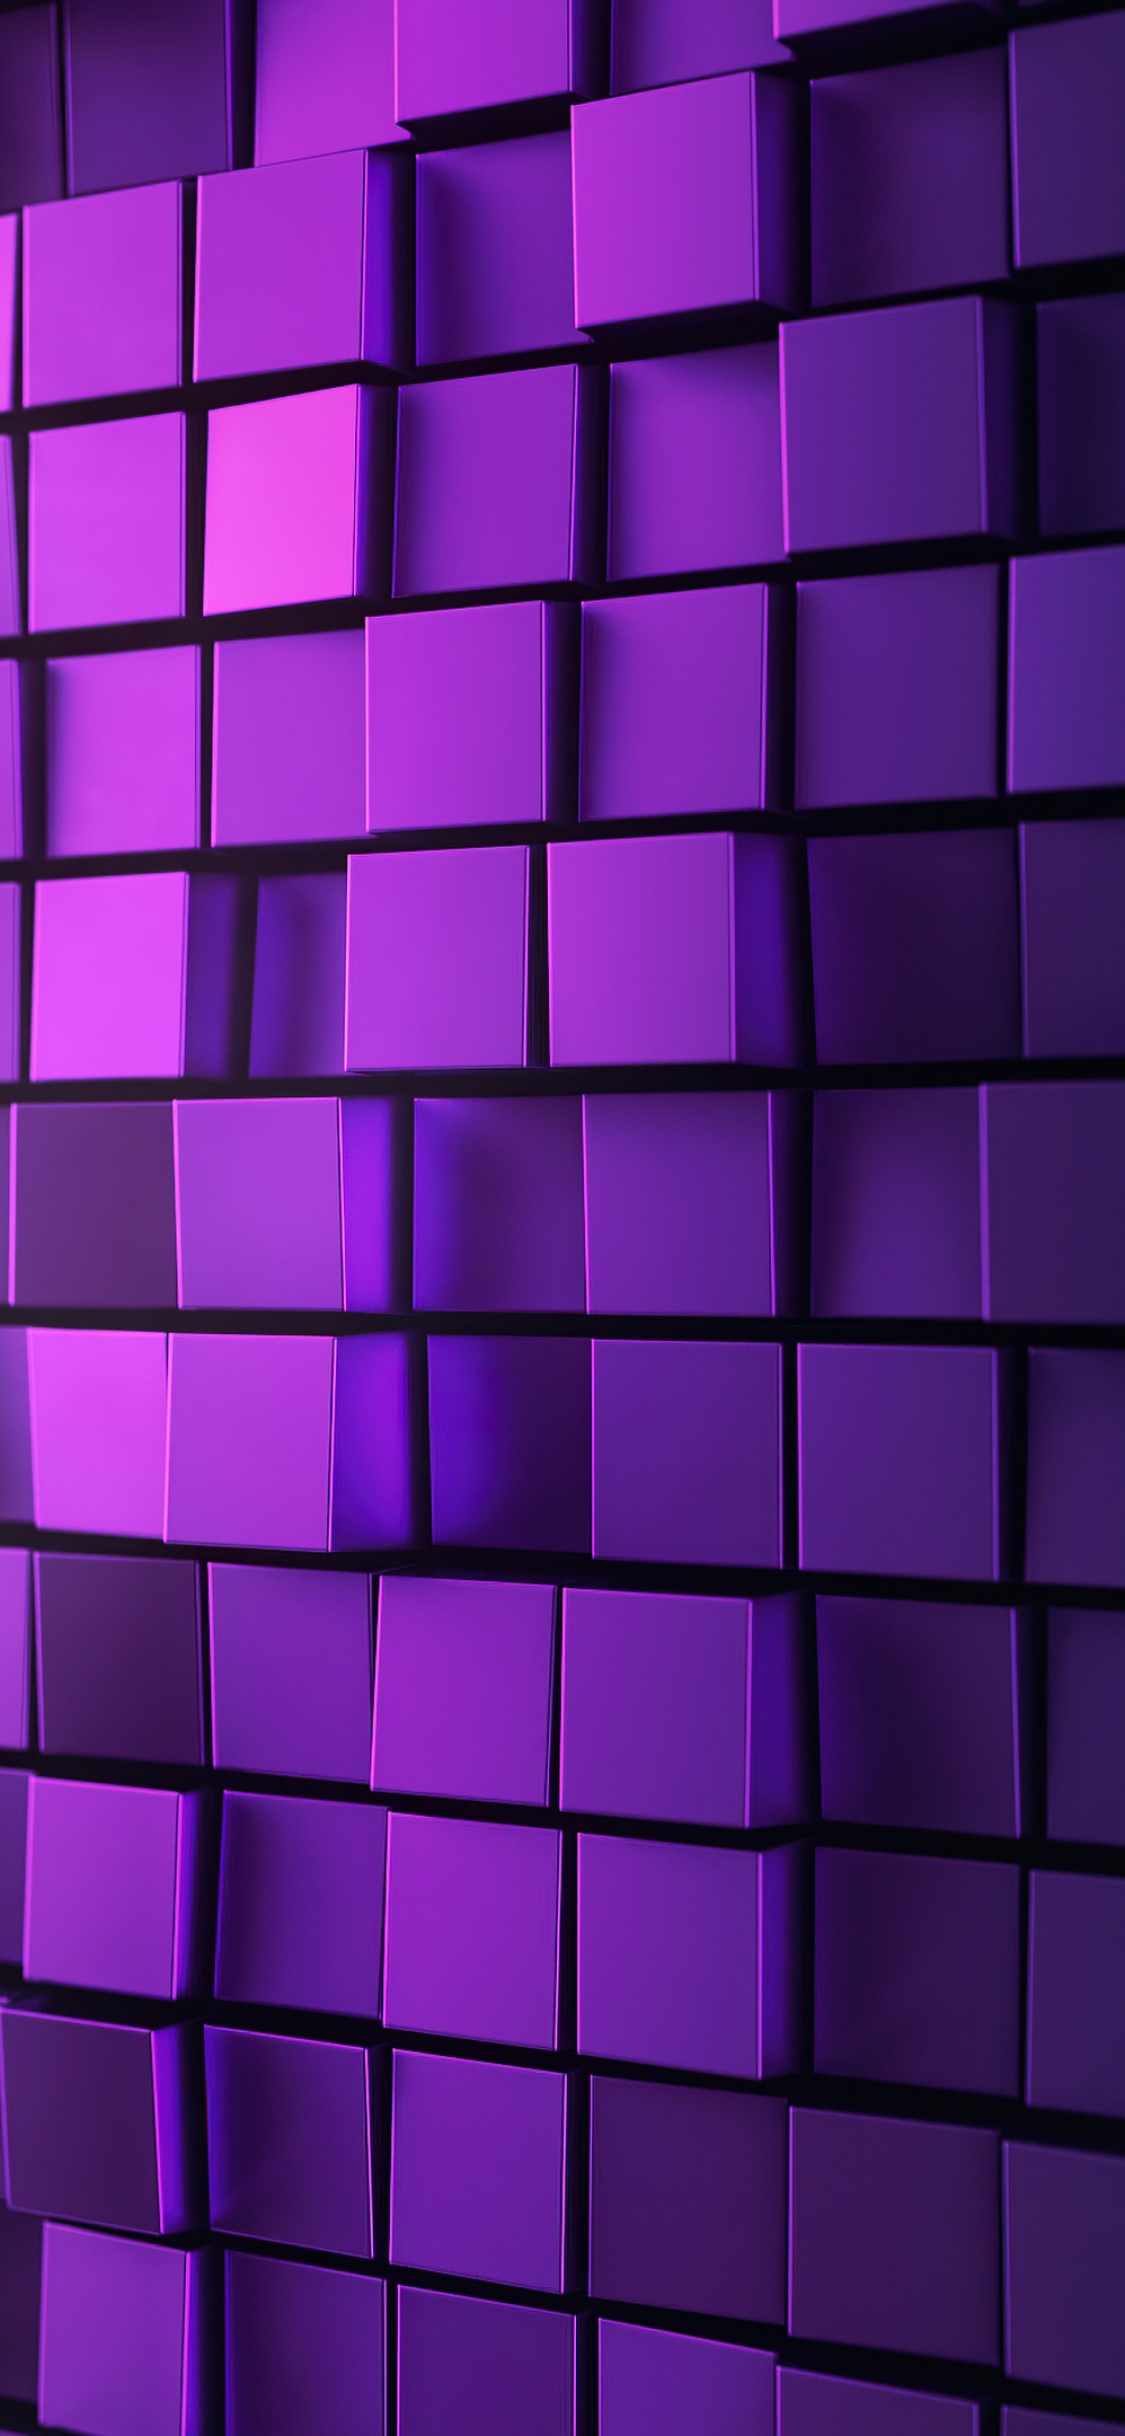 3D background Wallpaper 4K, Squares, Purple light, Abstract, #2700